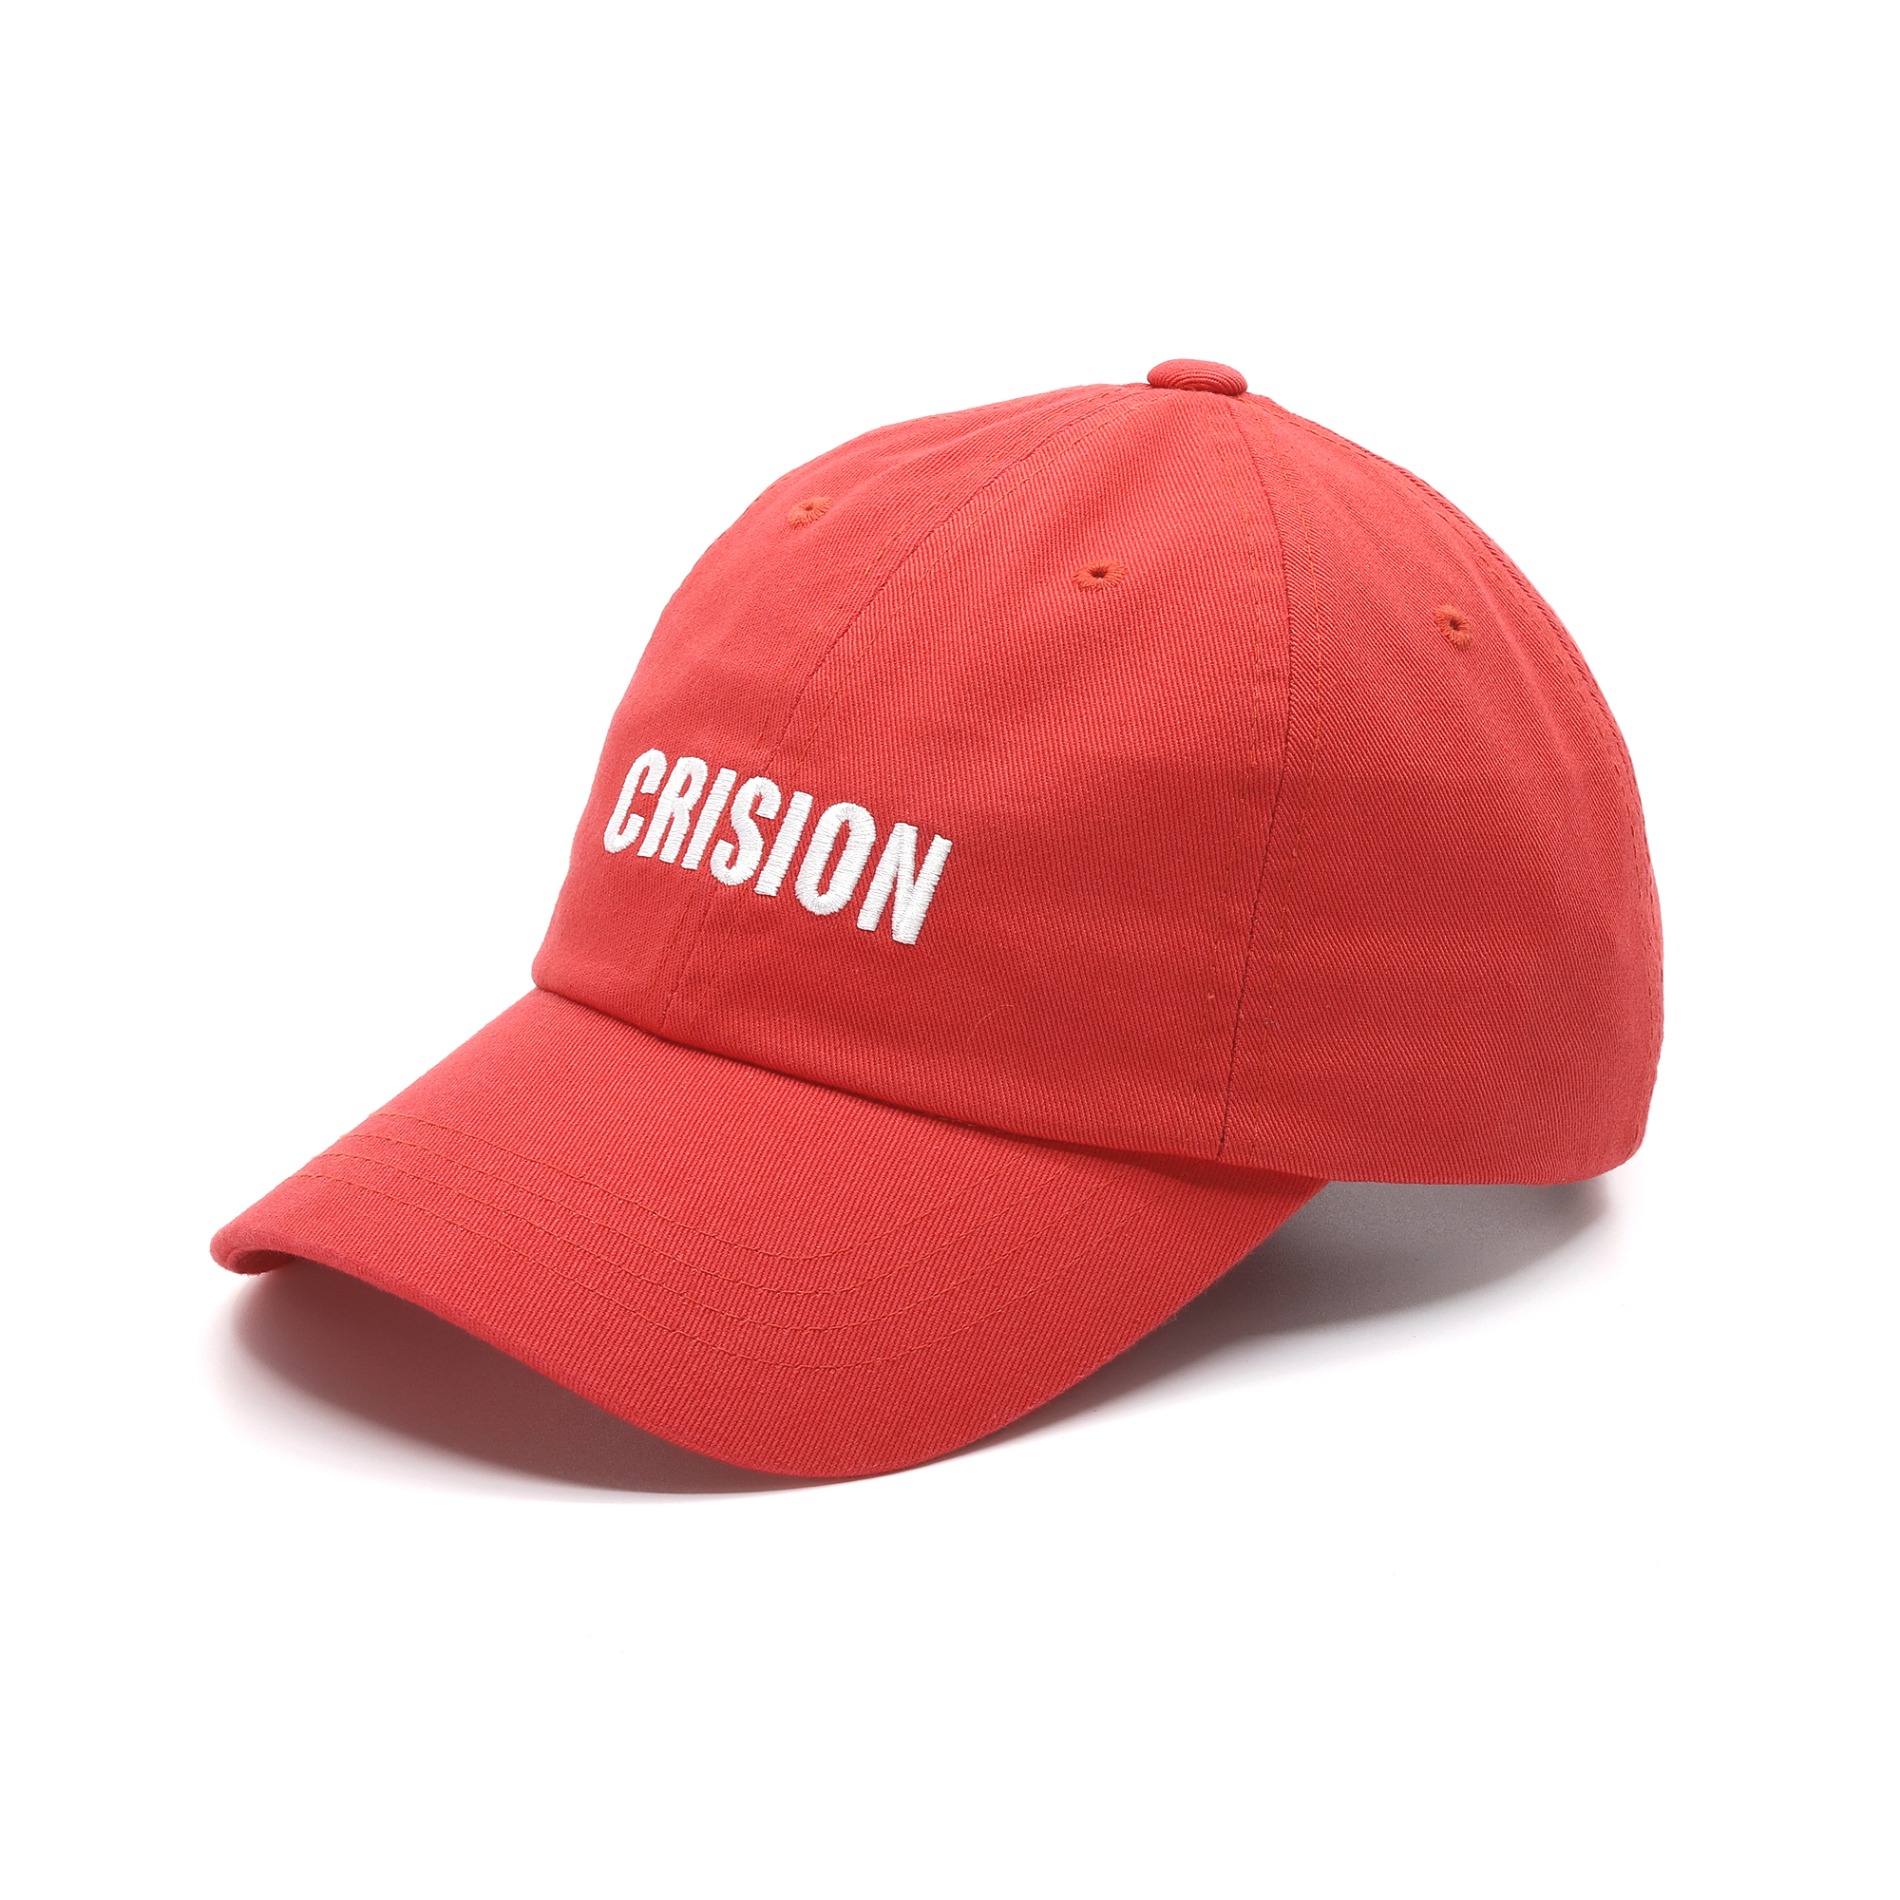 Simple Ball Cap Red